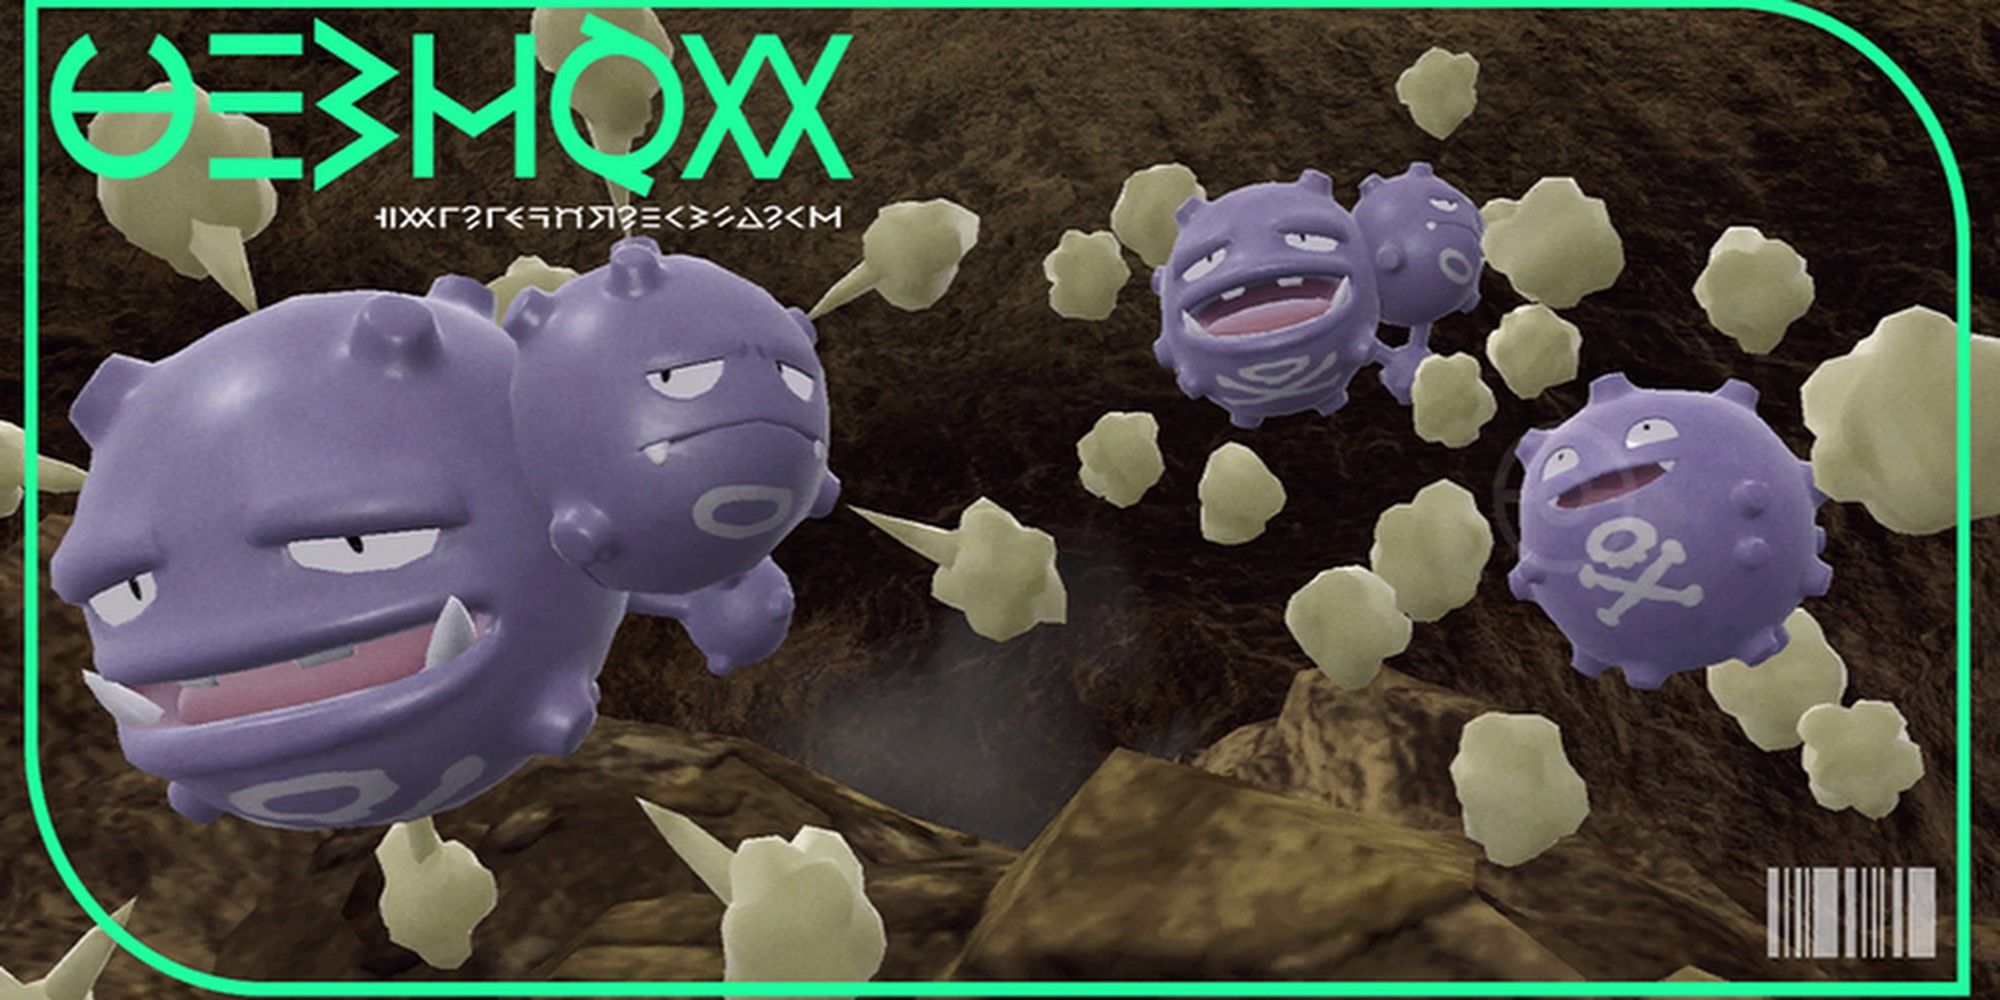 The cover image for Weezing's dex entry in paldea